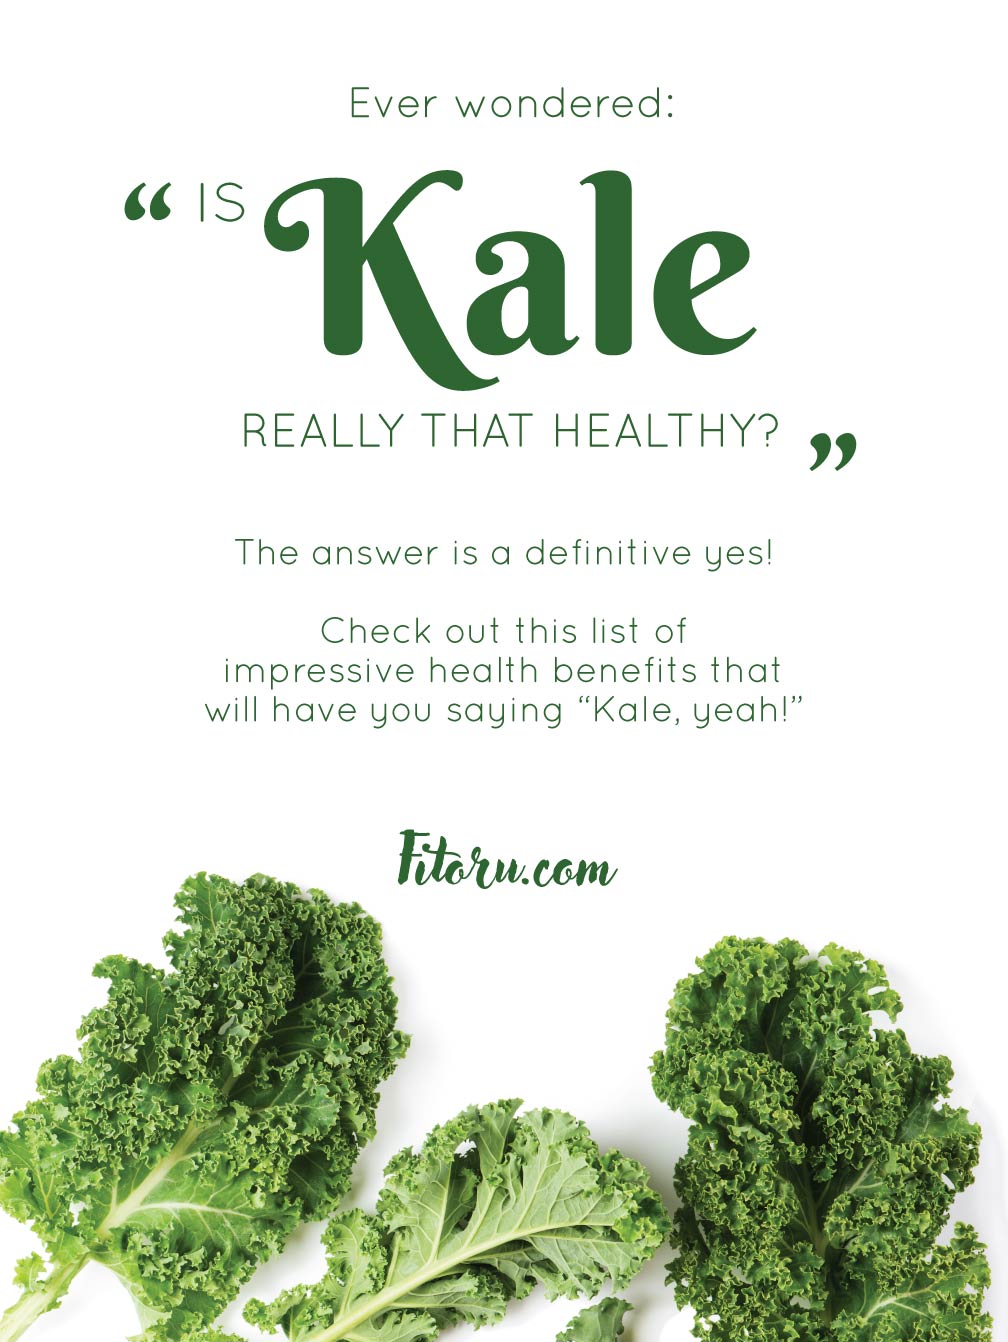 5 kale health benefits that live up to the hype.